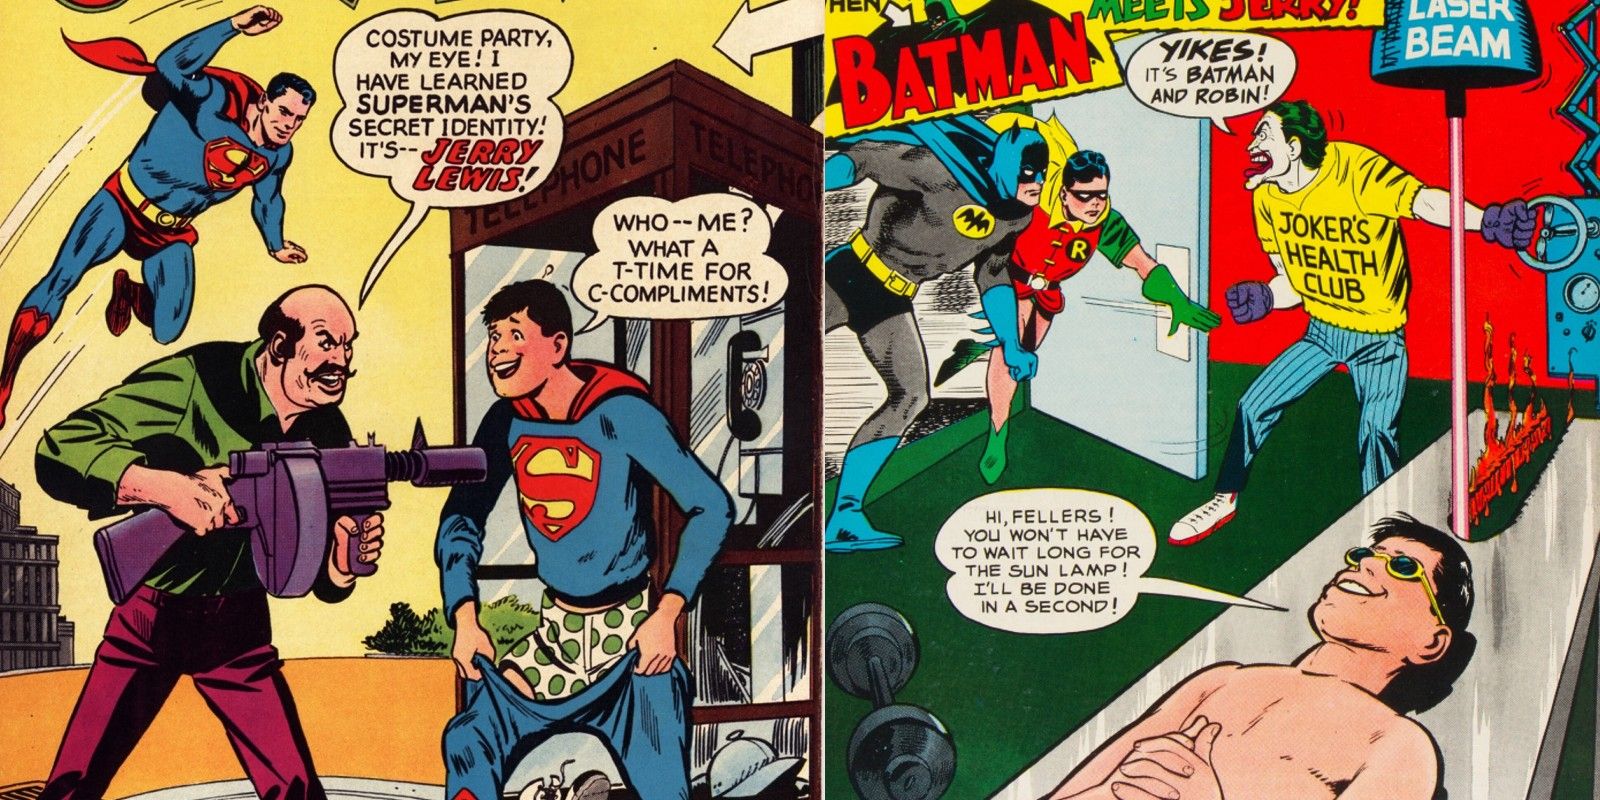 Adventures of Jerry Lewis crossovers with Batman and Superman